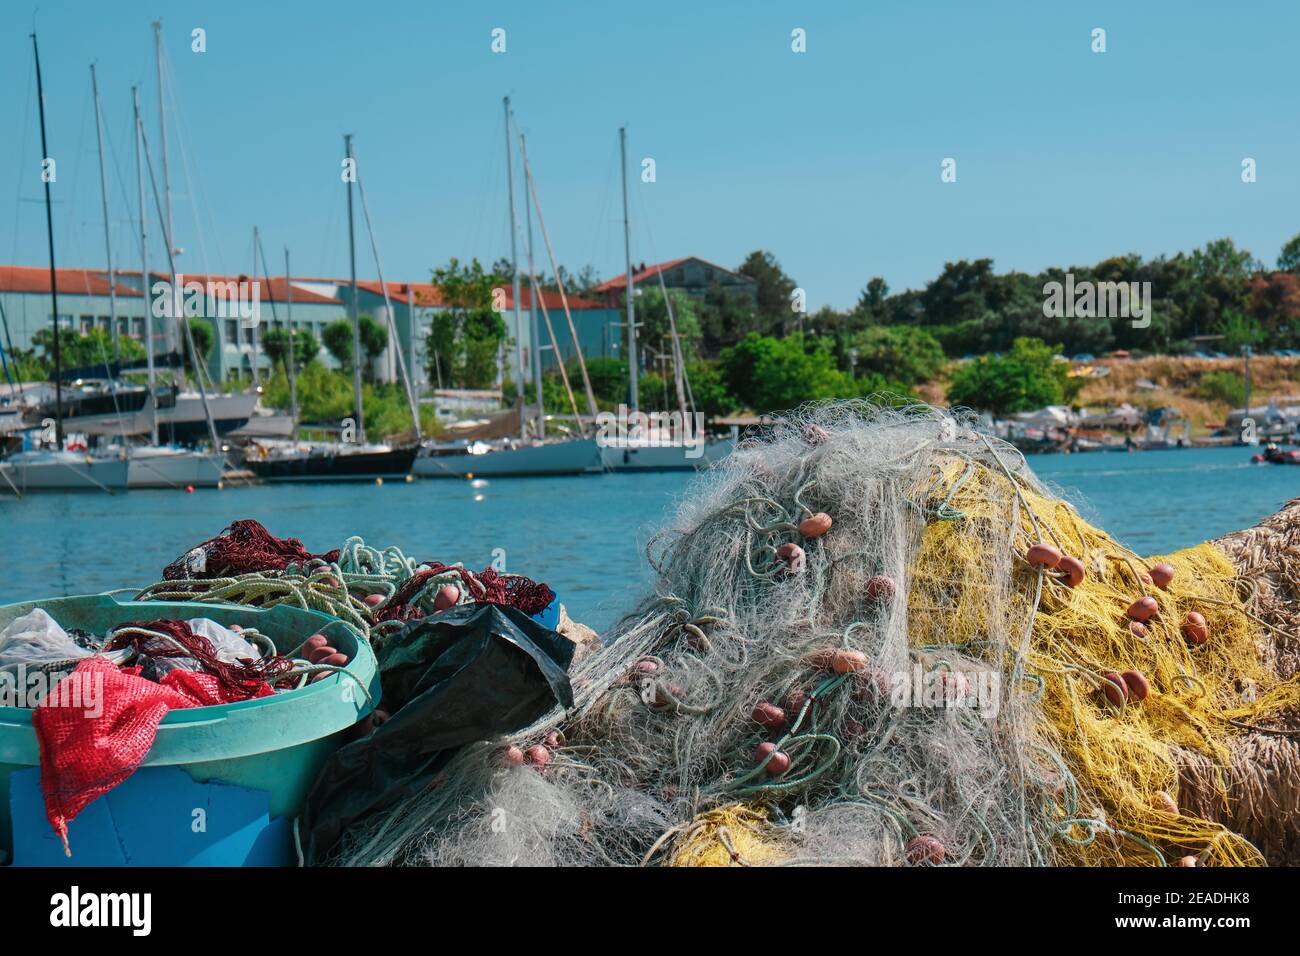 Traditional fishery harbor in greece with multiple colourful fish nests Stock Photo